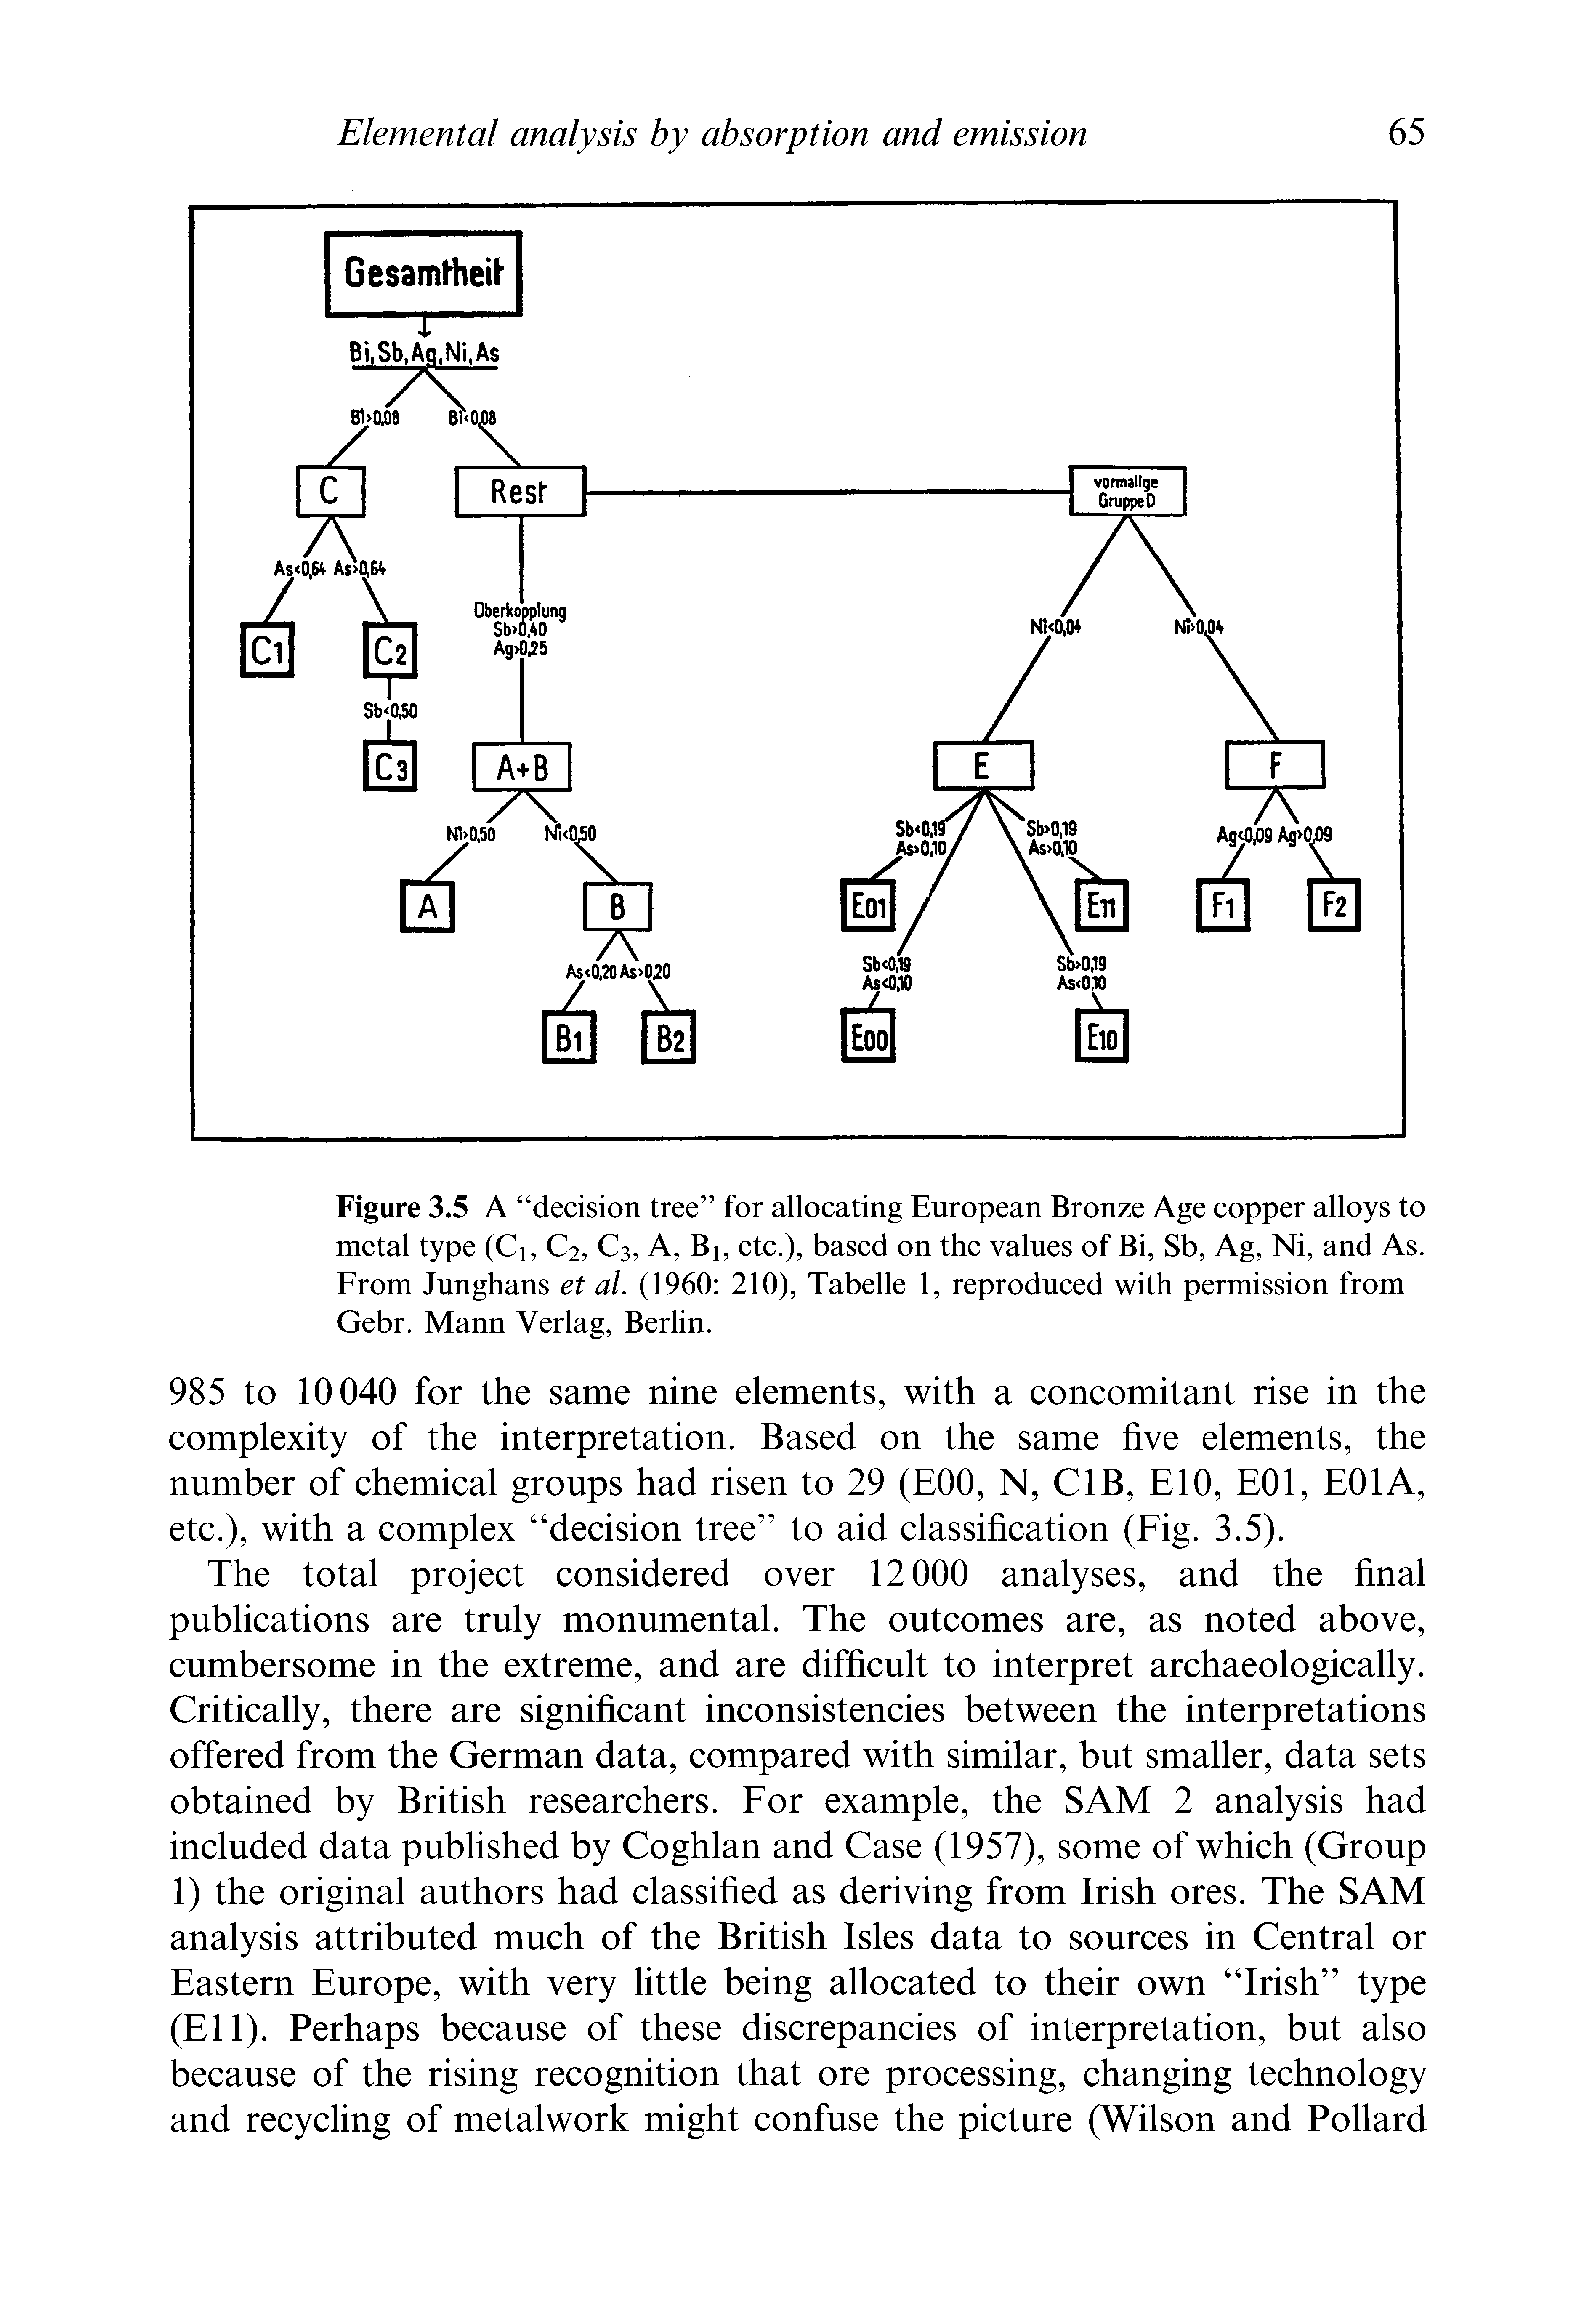 Figure 3.5 A decision tree for allocating European Bronze Age copper alloys to metal type (Ci, C2, C3, A, Bj, etc.), based on the values of Bi, Sb, Ag, Ni, and As. From Junghans et al. (1960 210), Tabelle 1, reproduced with permission from Gebr. Mann Verlag, Berlin.